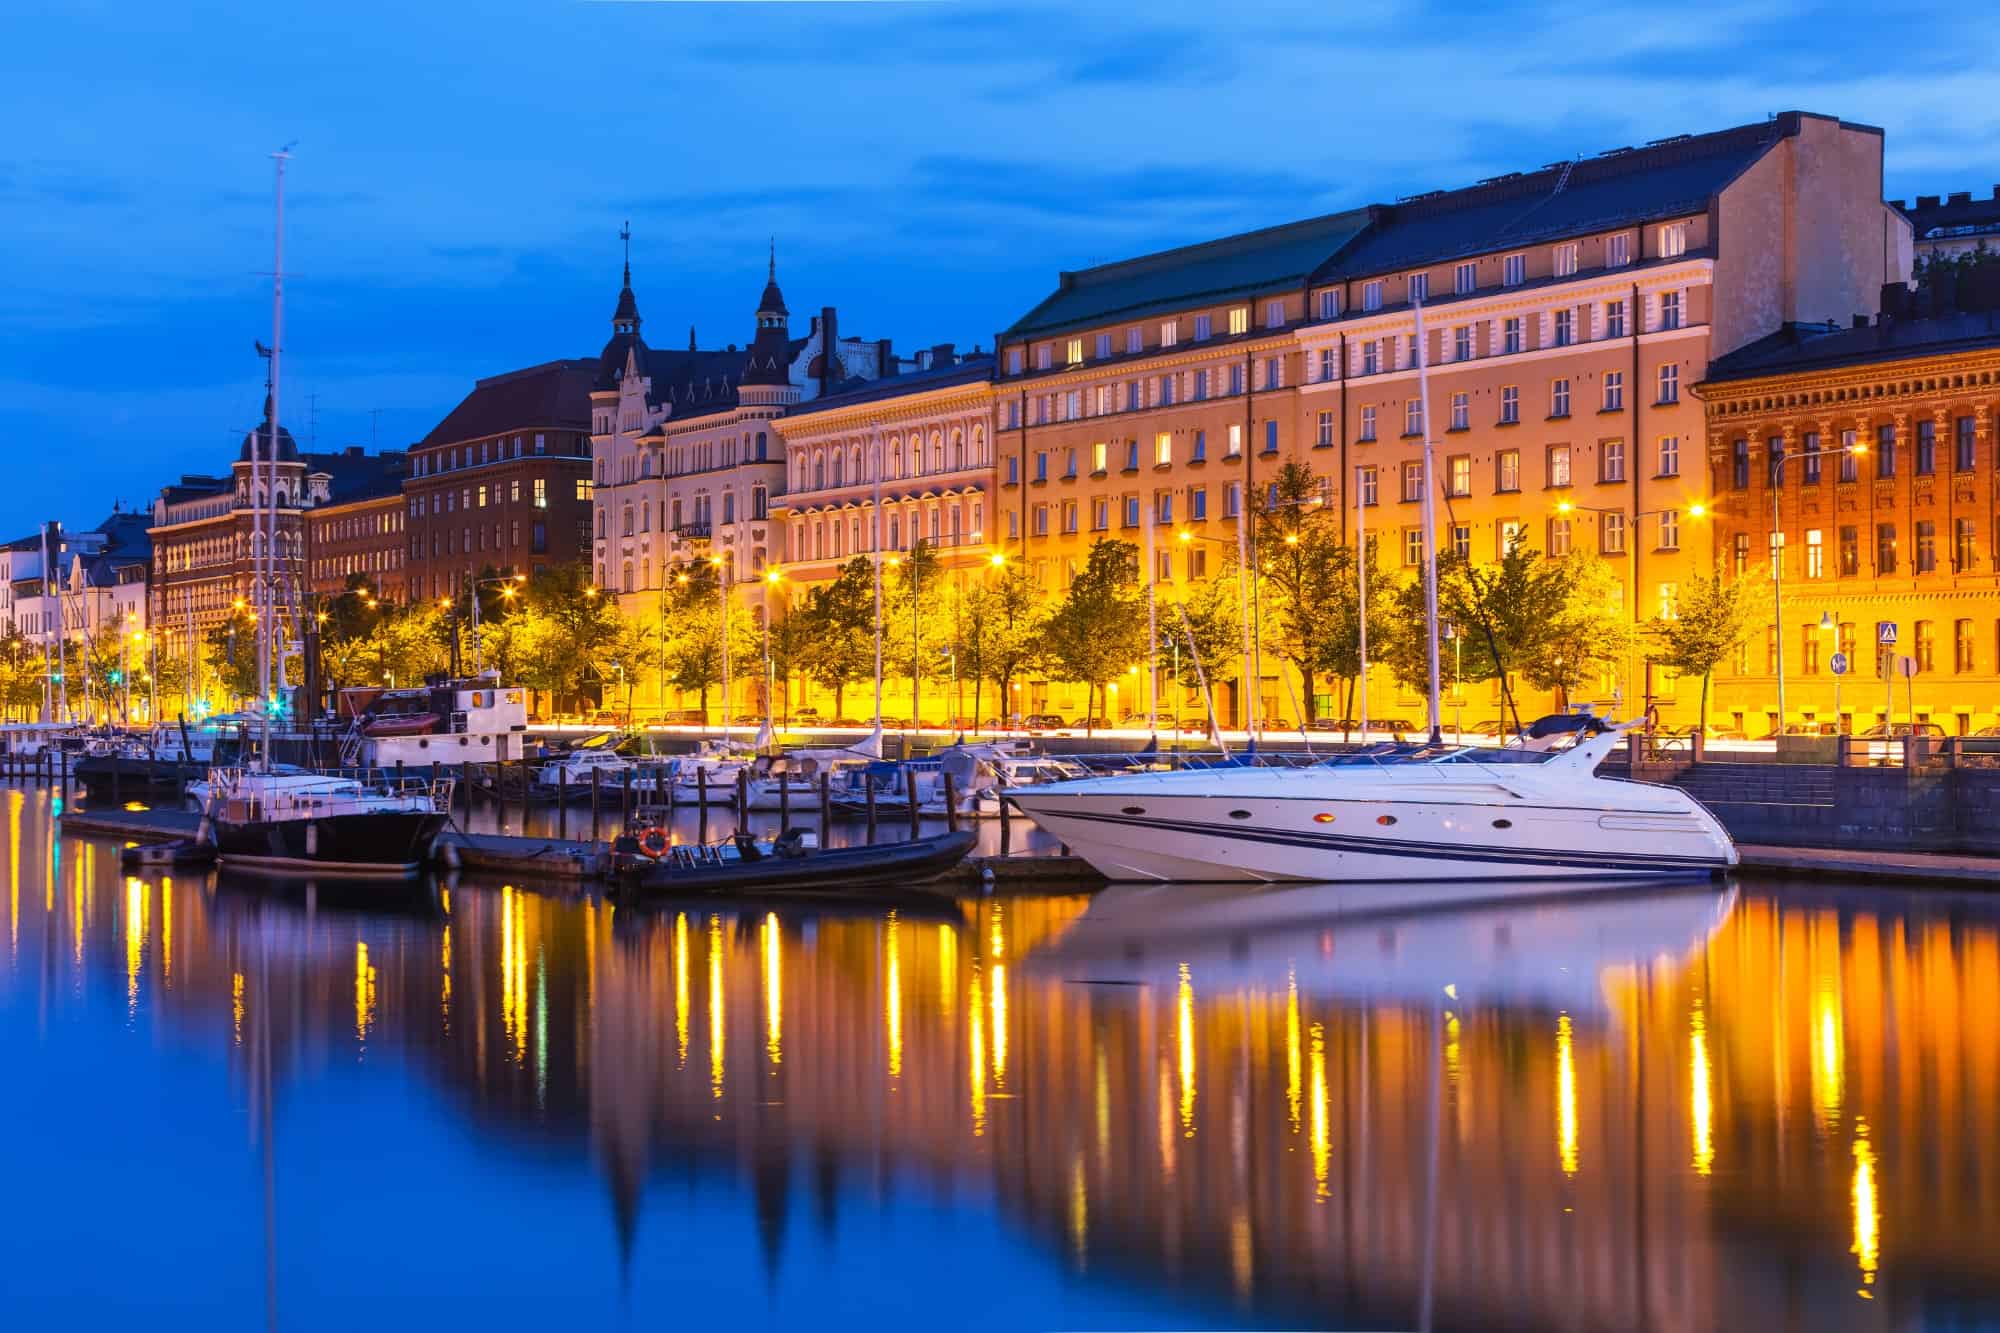 Yachts in harbor in Helsinki with grand buildings in background, at sunset